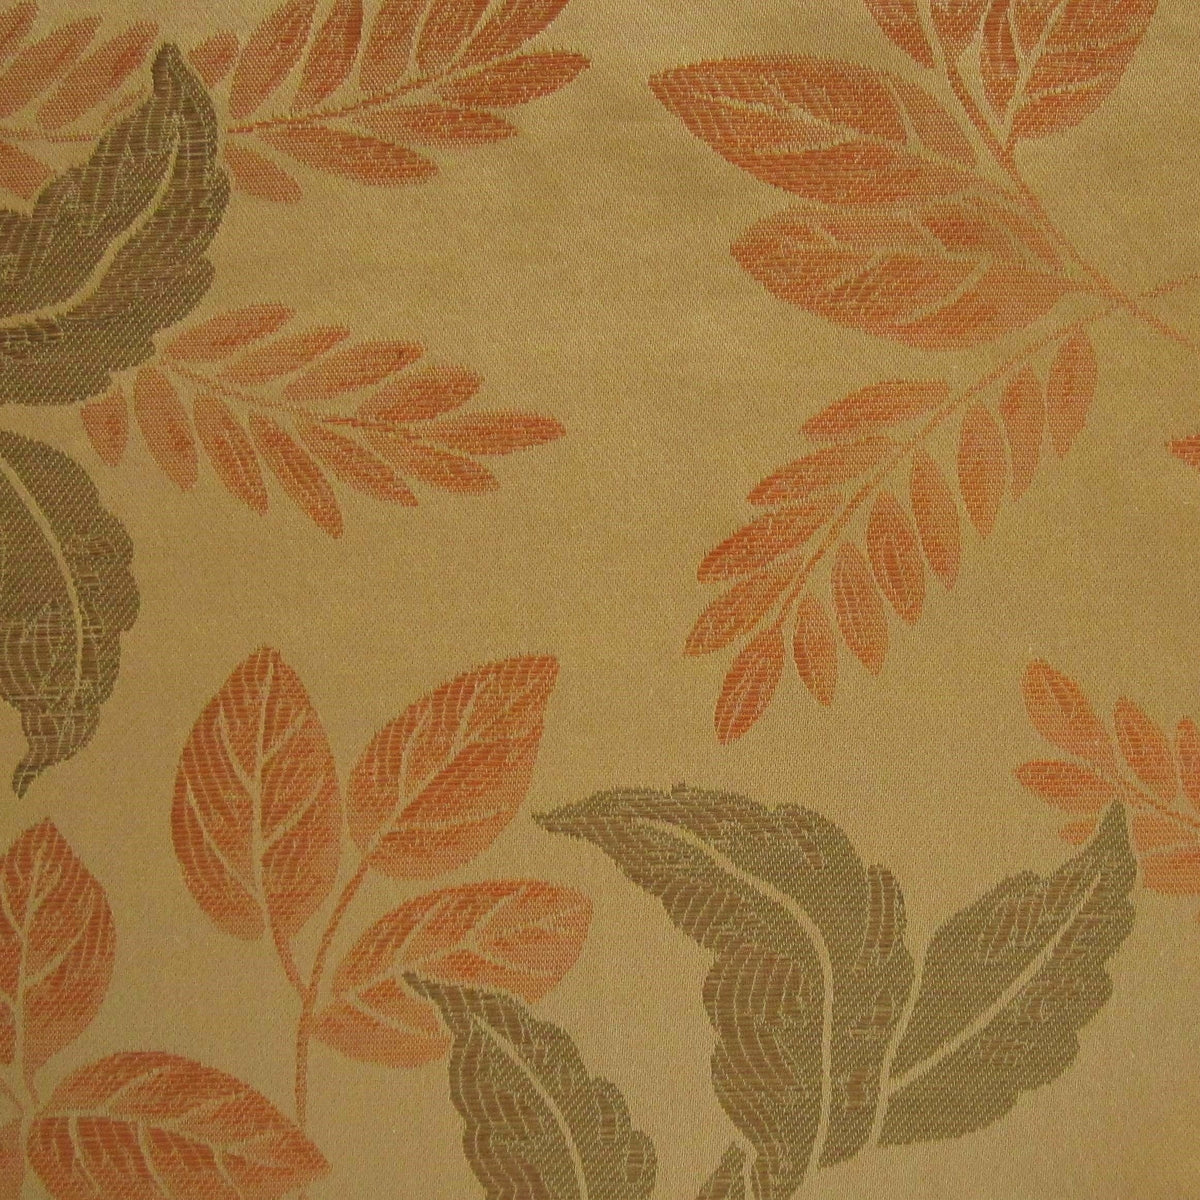 Home Treasures Autumn Jaquard Bedding Swatch Gold Fine Linens